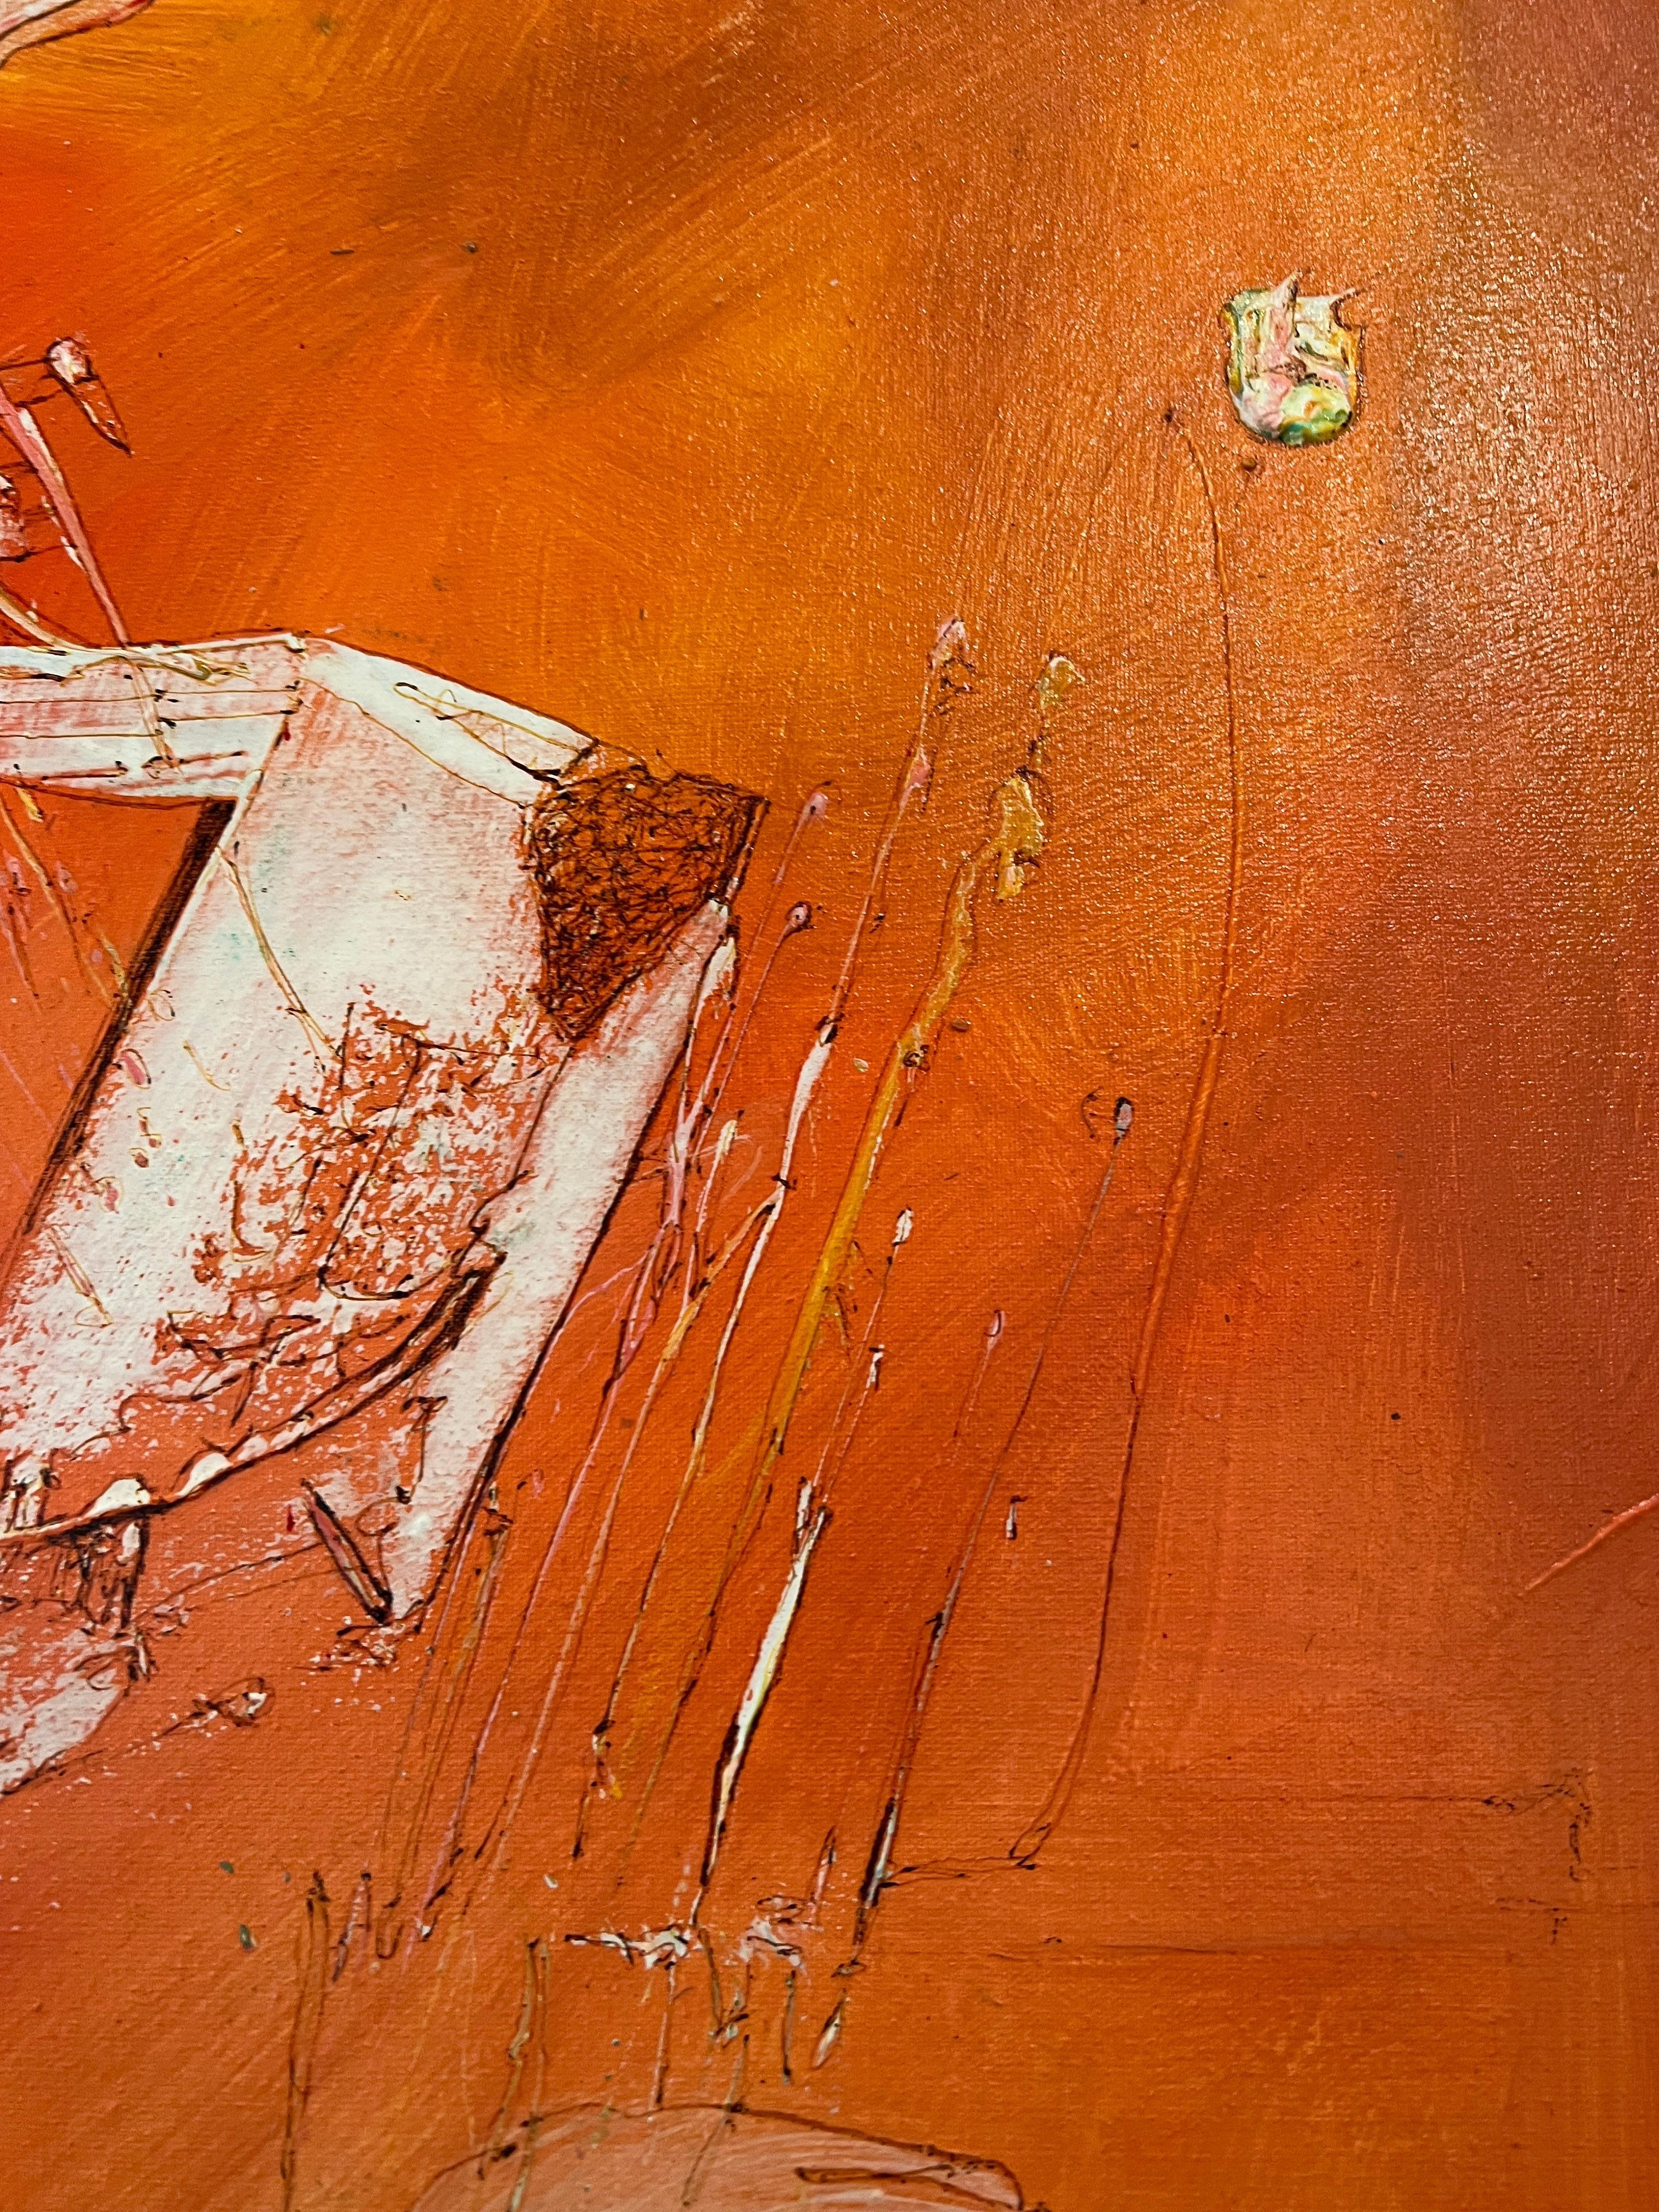 Aceder (Dude): Contemporary Abstract Acrylic Painting on Canvas - Orange Abstract Painting by Juan Lazaro